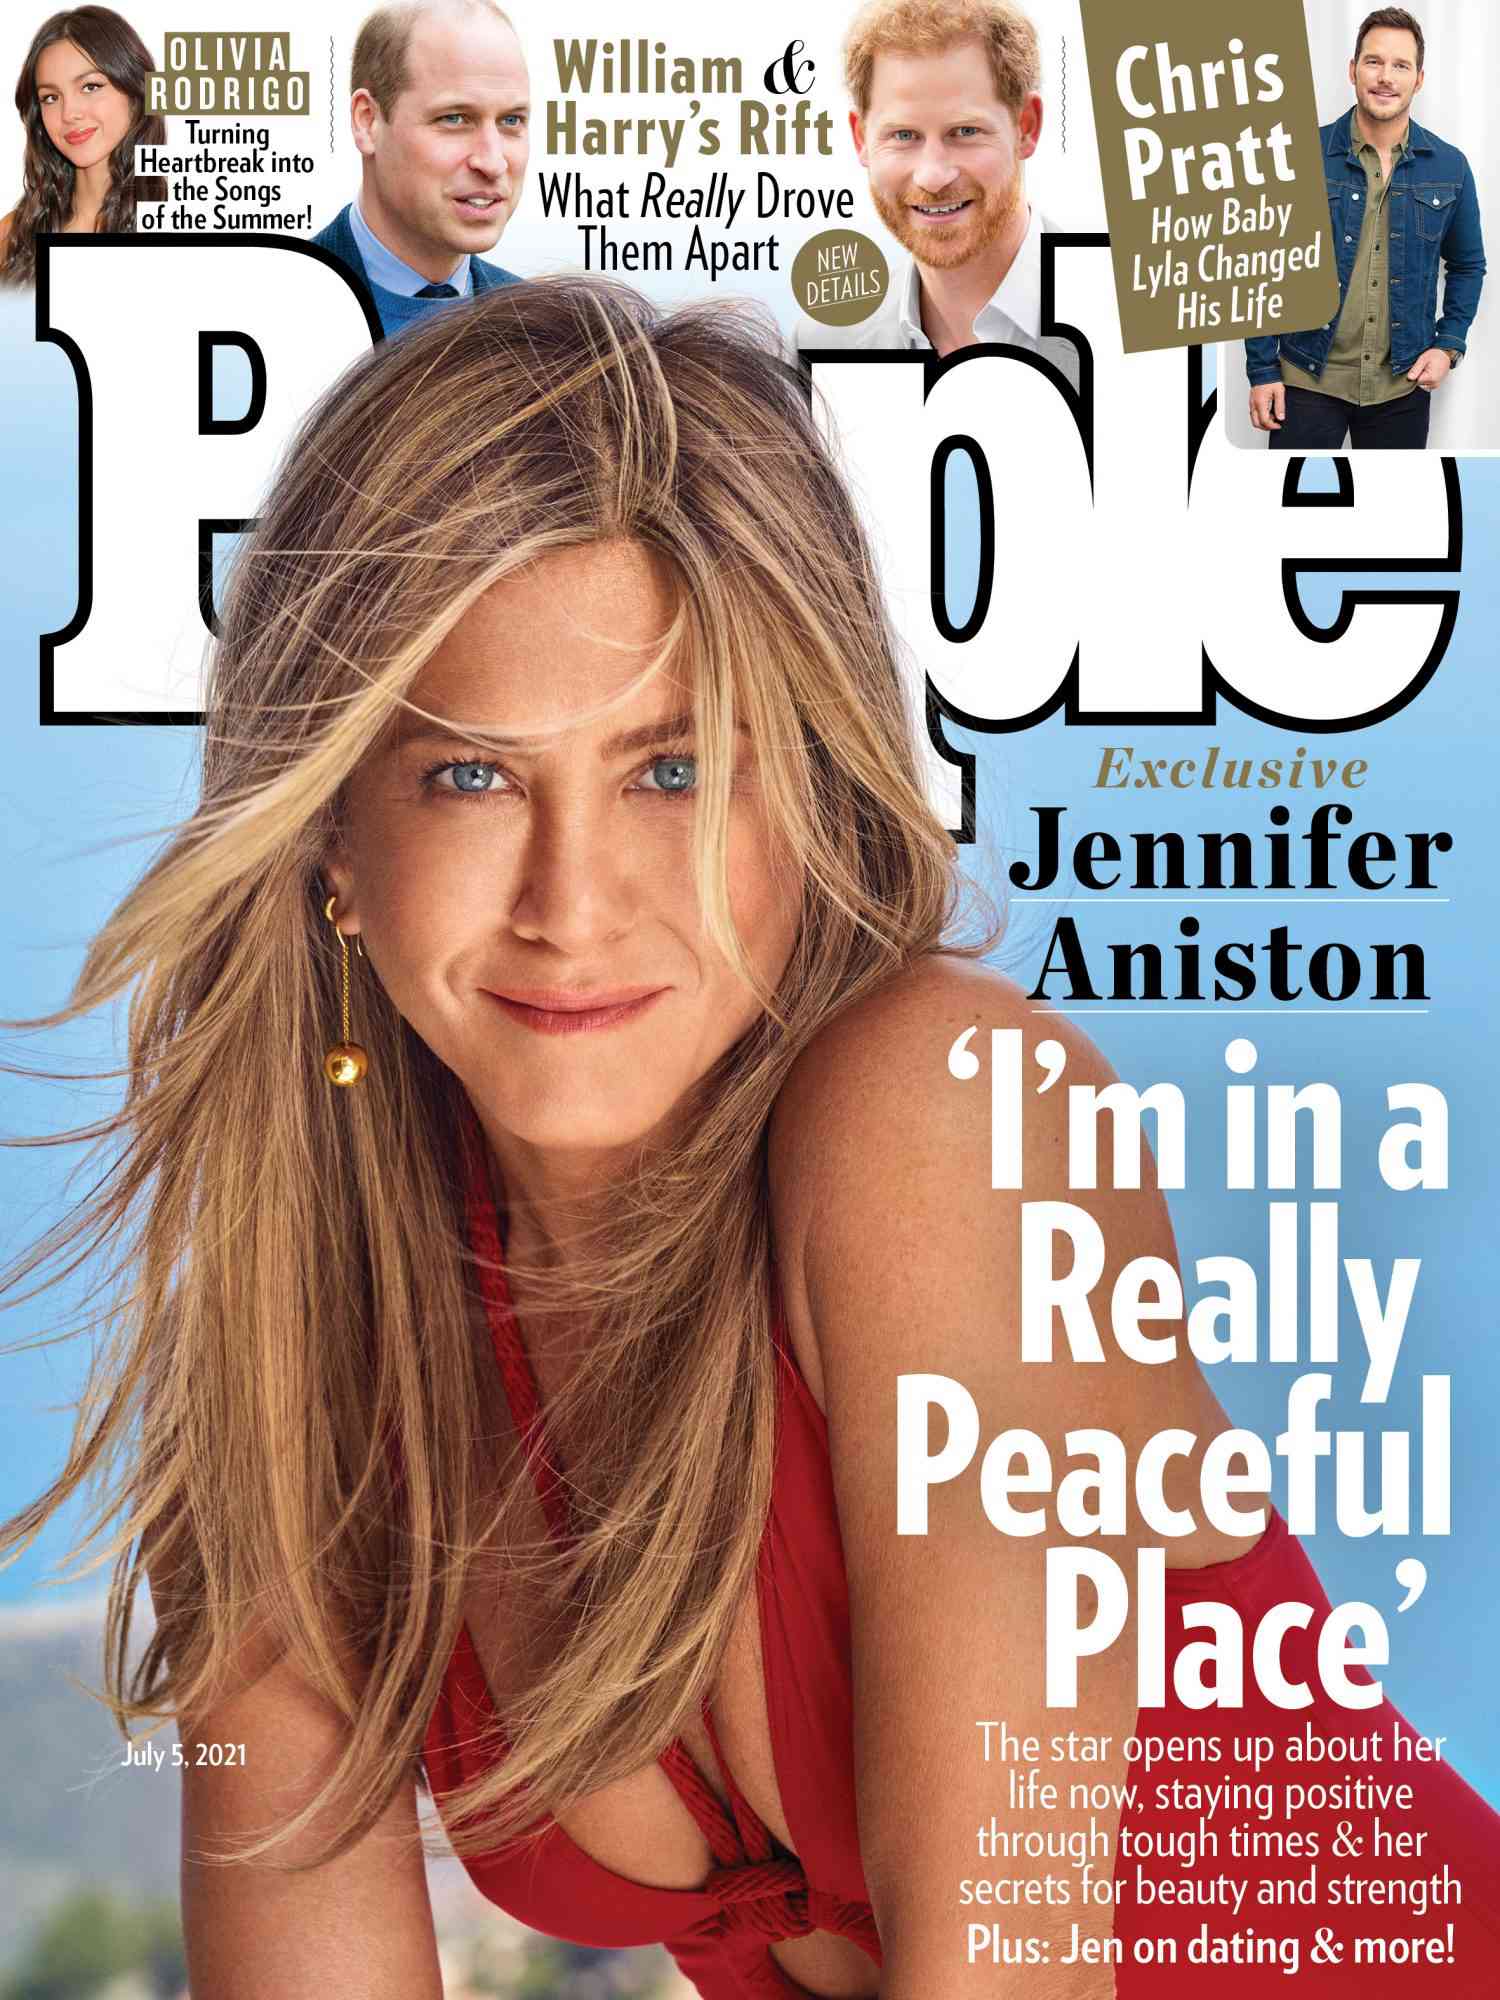 Jennifer Aniston on Her Life Now: 'I'm in a Really Peaceful Place' | PEOPLE. com